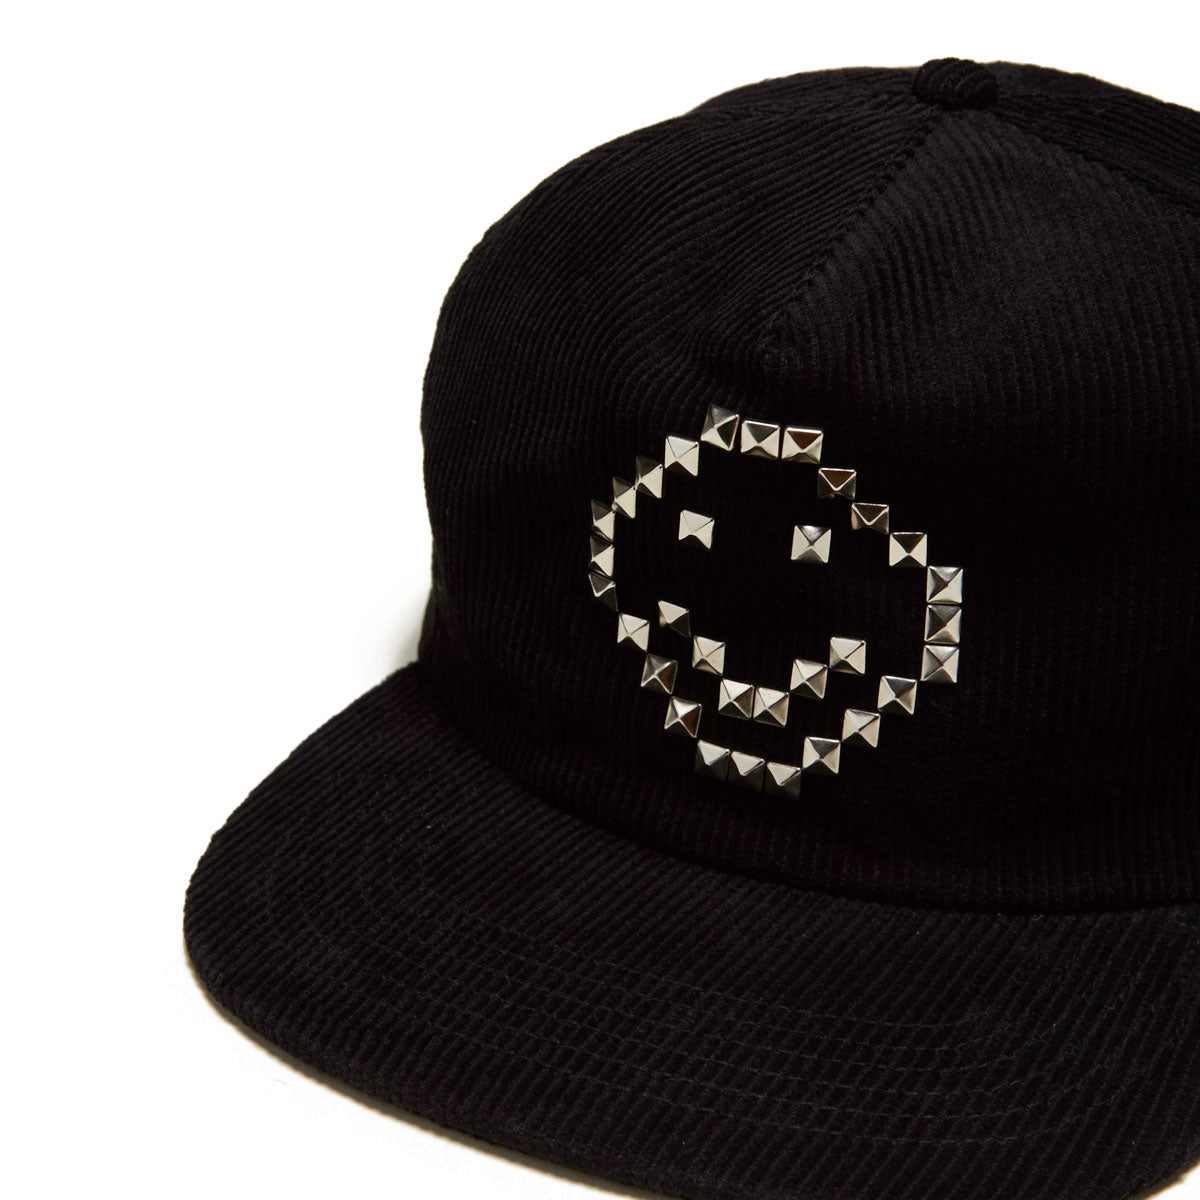 Loosey Cord Snap Back Hat - Black image 3